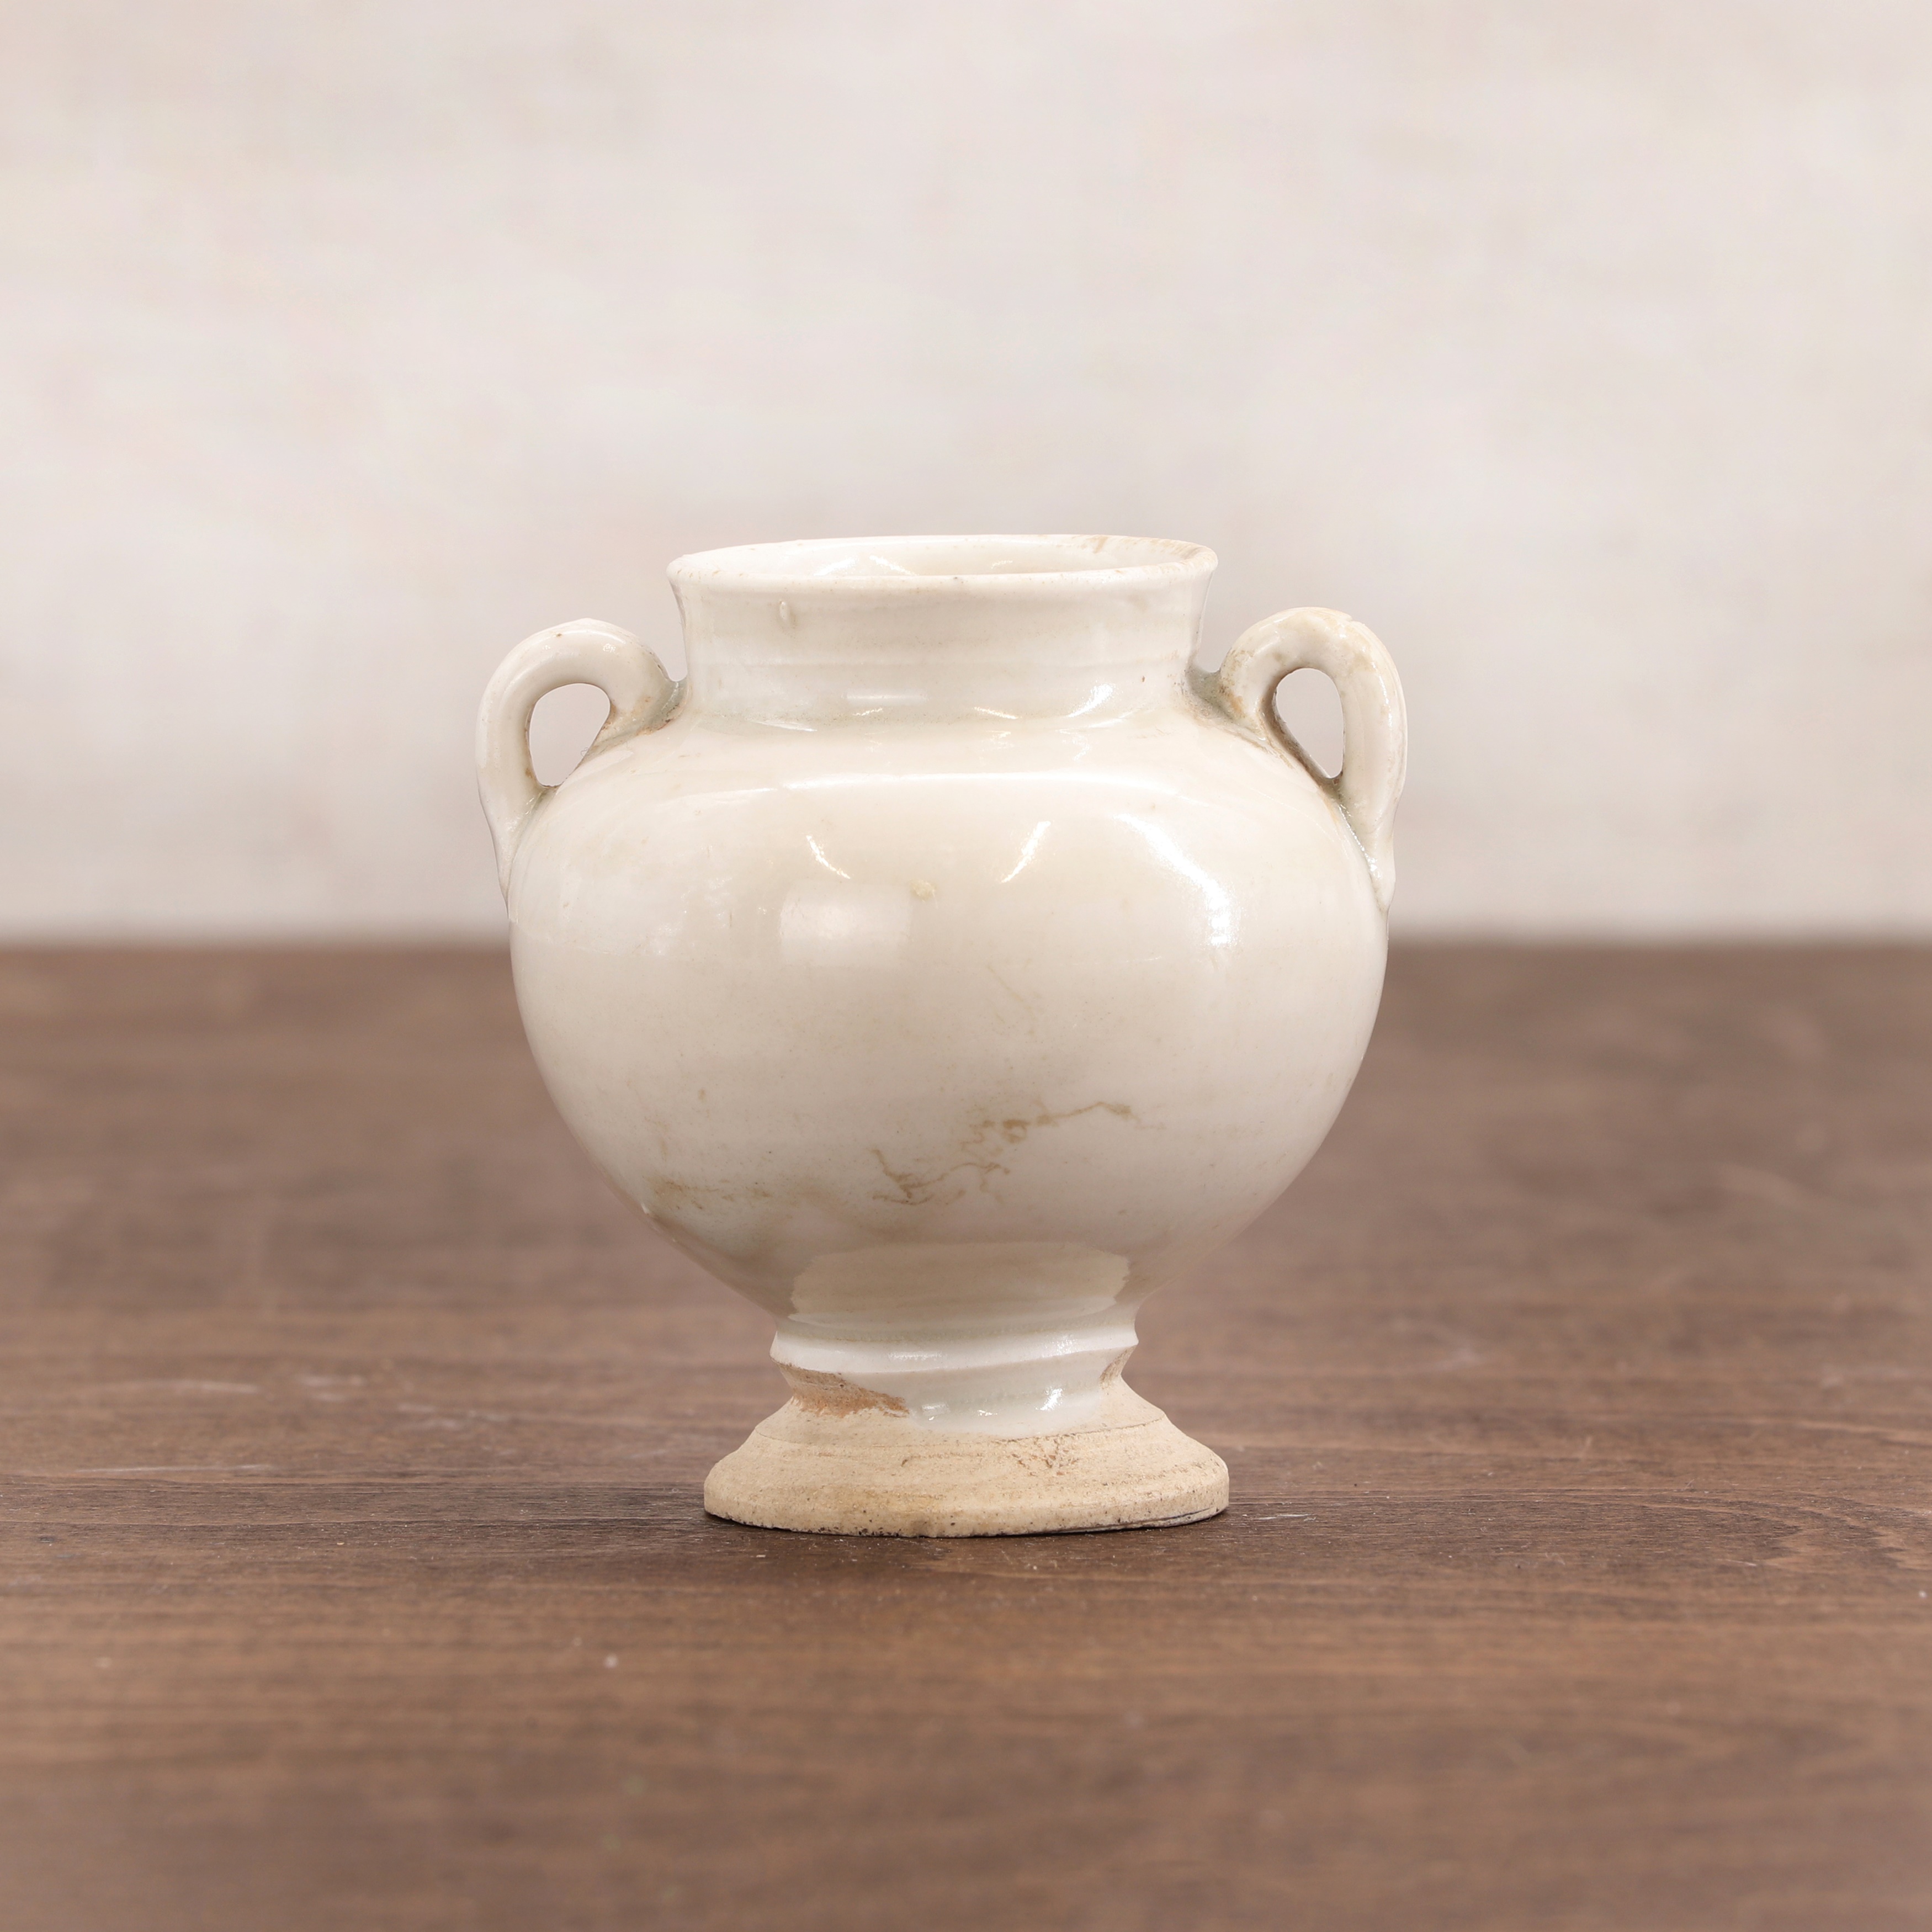 A Chinese Ding ware vase (£300-500)